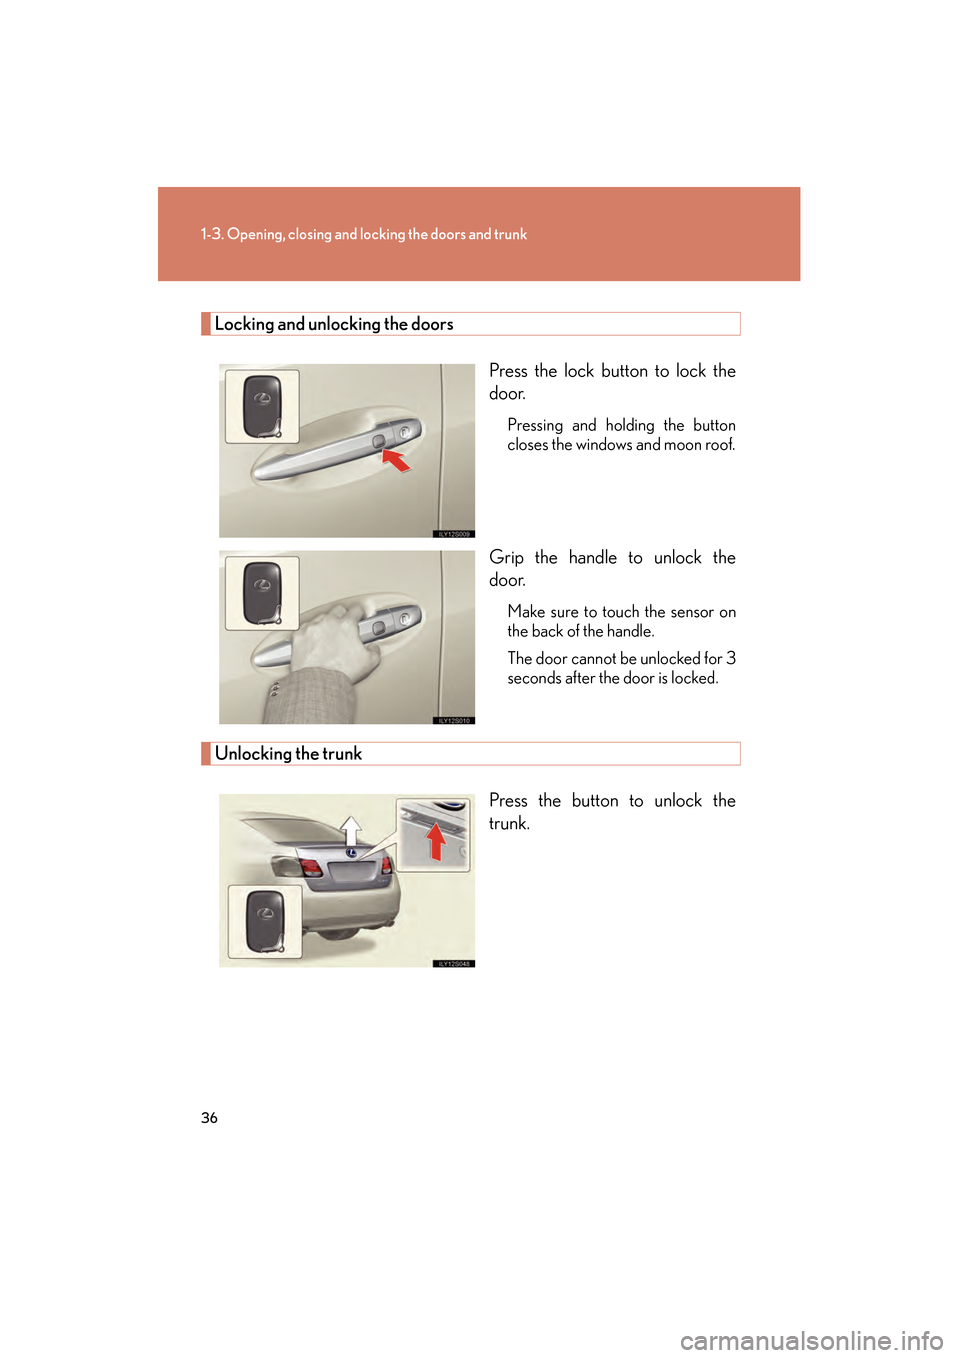 Lexus GS450h 2008  Owners Manual 36
1-3. Opening, closing and locking the doors and trunk
GS_HV_U
June 19, 2008 1:15 pm
Locking and unlocking the doorsPress the lock button to lock the
door.
Pressing and holding the button
closes the